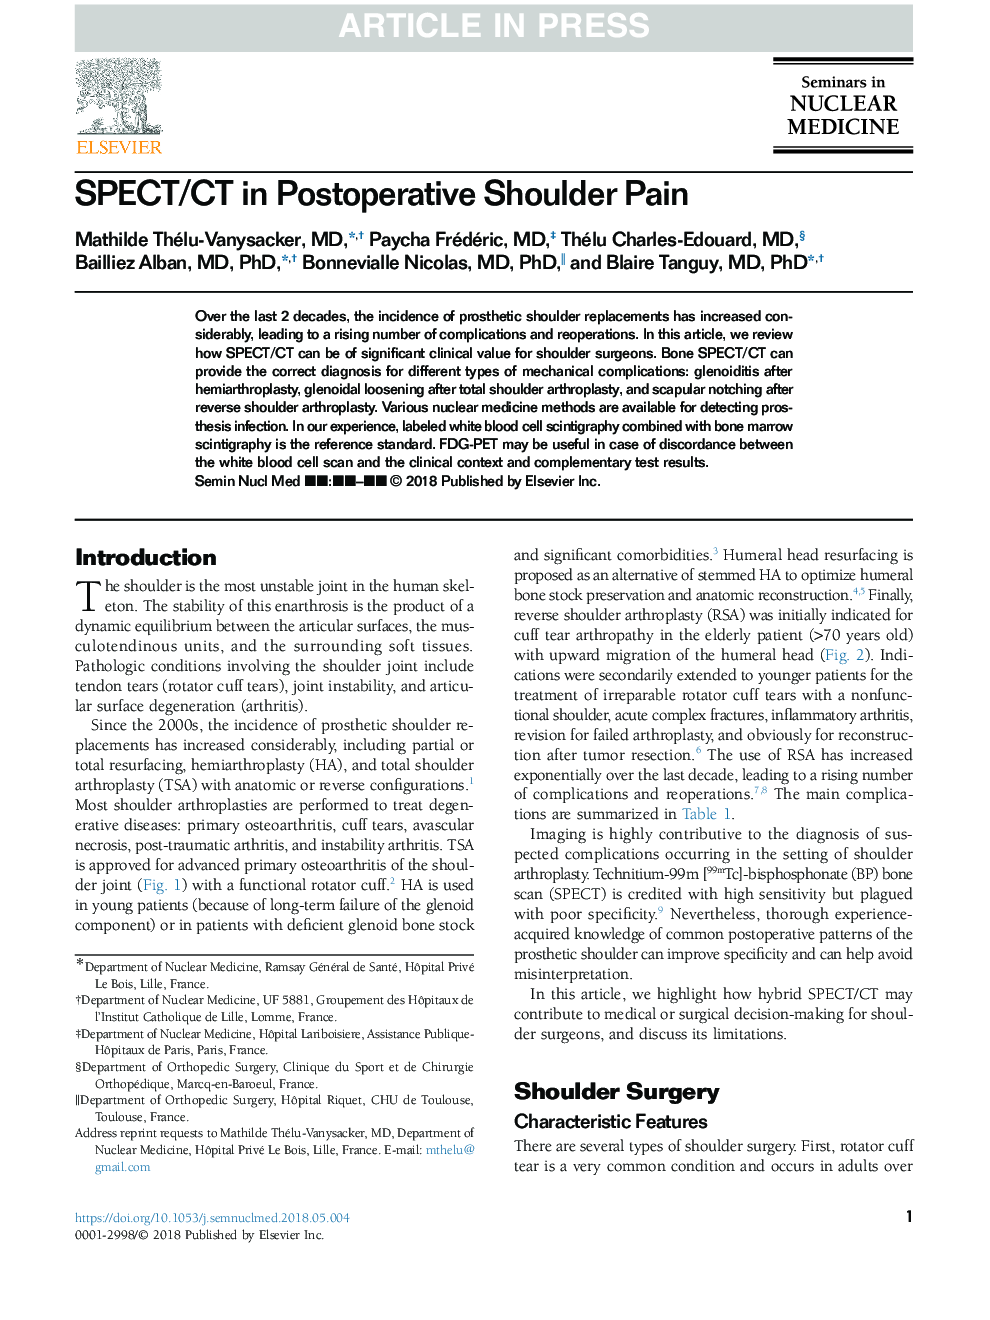 SPECT/CT in Postoperative Shoulder Pain